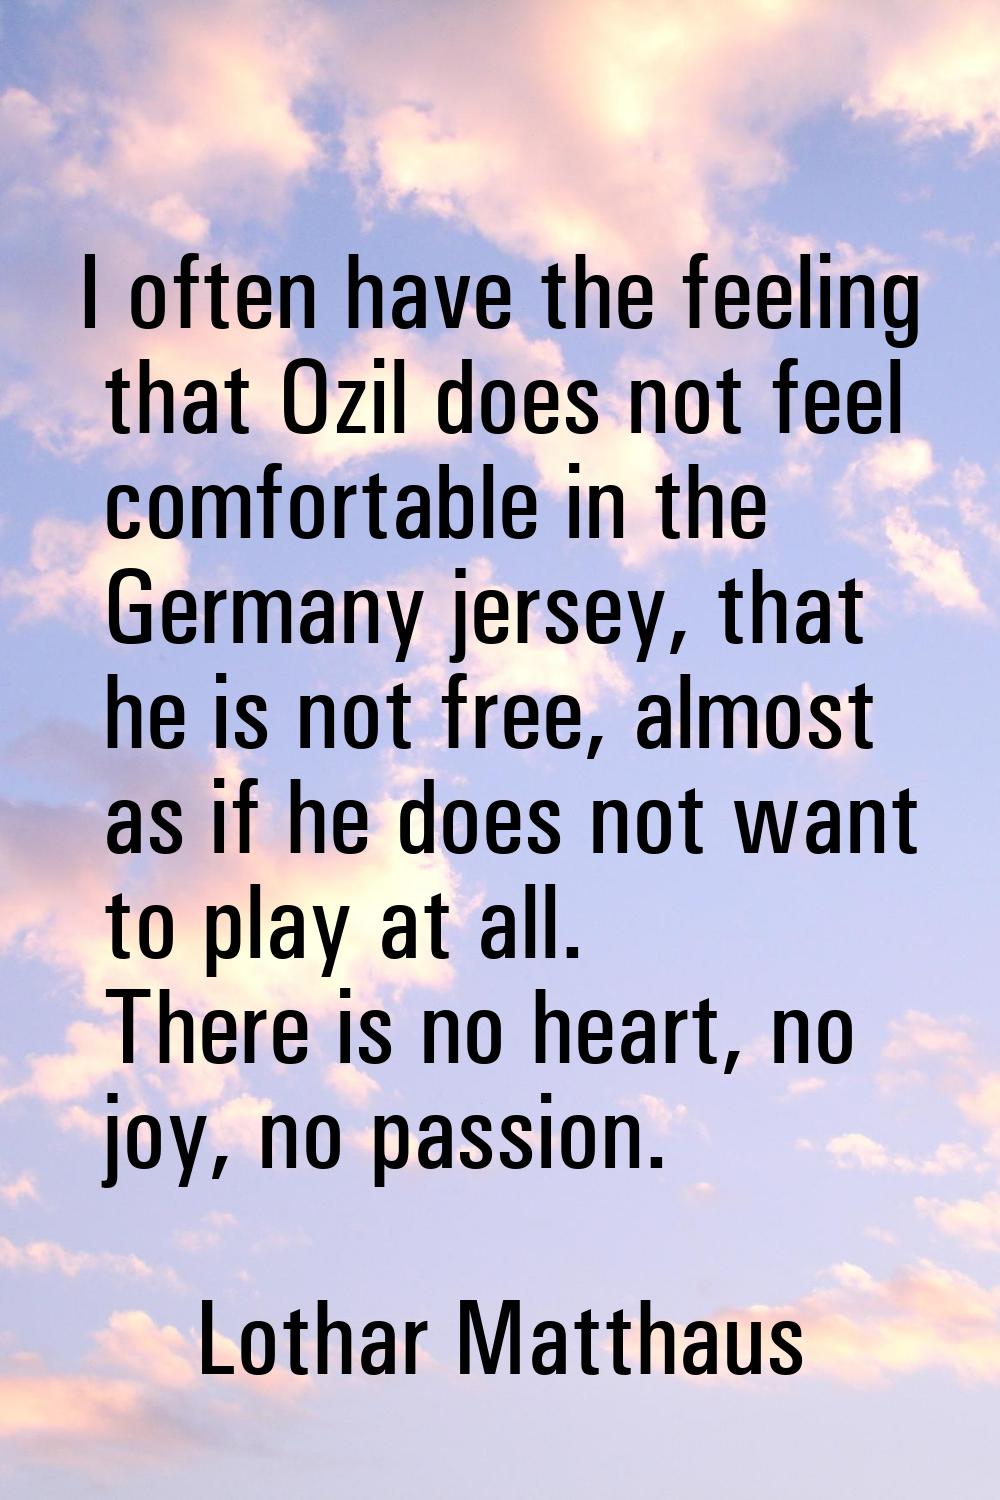 I often have the feeling that Ozil does not feel comfortable in the Germany jersey, that he is not 